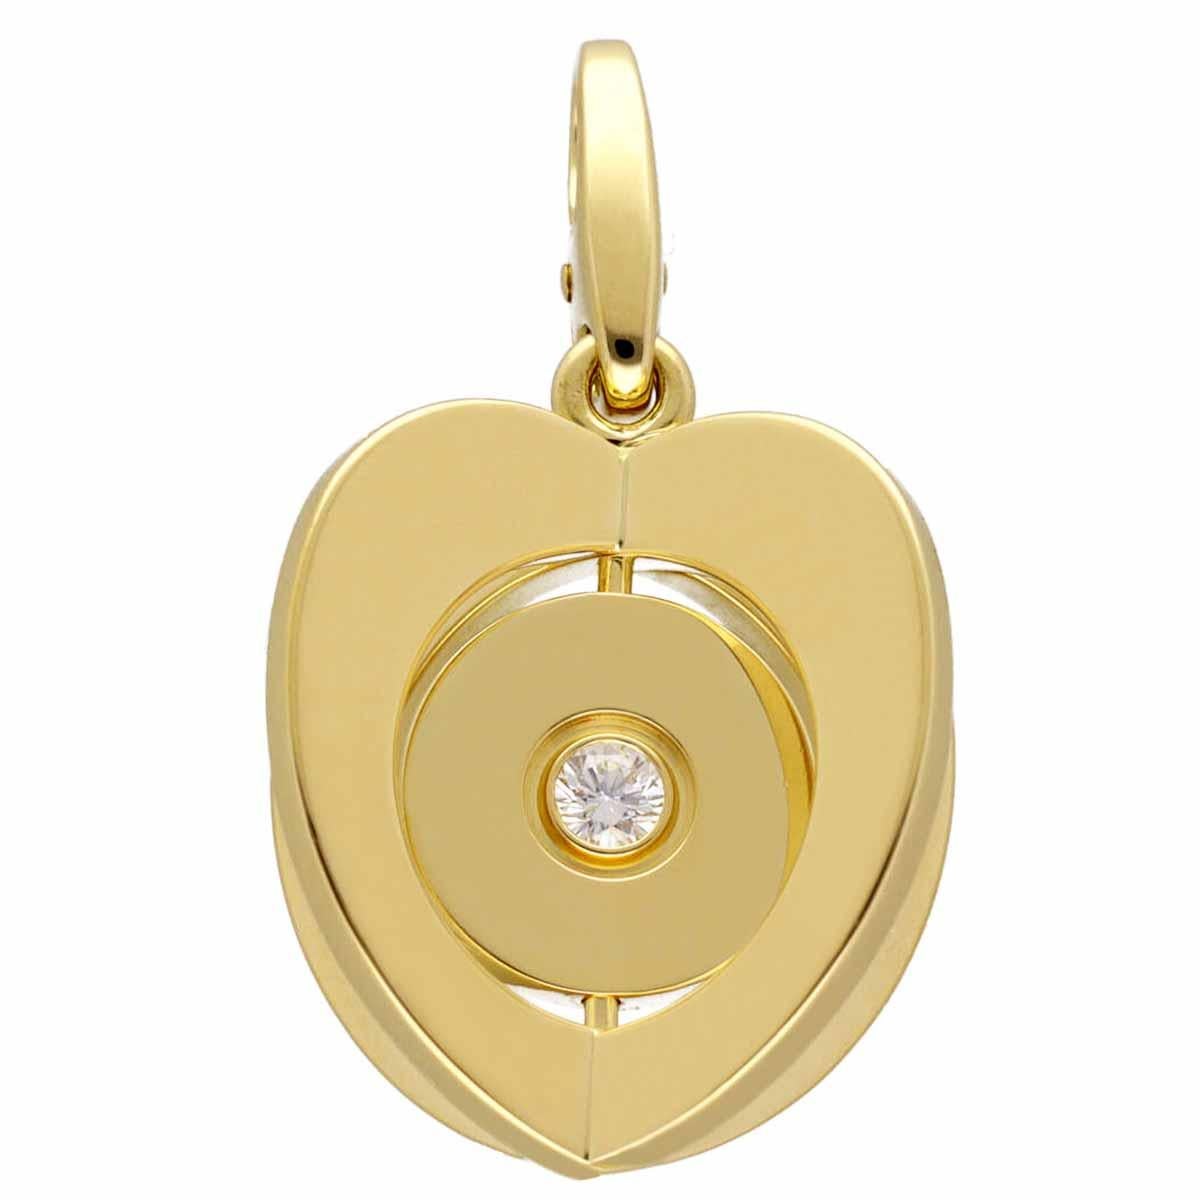 Brand:Cartier
Name:new york apple charm
Material:1P diamond, 750 K18 YG yellow gold
Weight:9.2g(Approx)
Size:W16.57mm×H30mm /W0.65in×H1.18in(Approx)
Comes with:Cartier box, case, Cartier certificate of repair (Nov 2022)